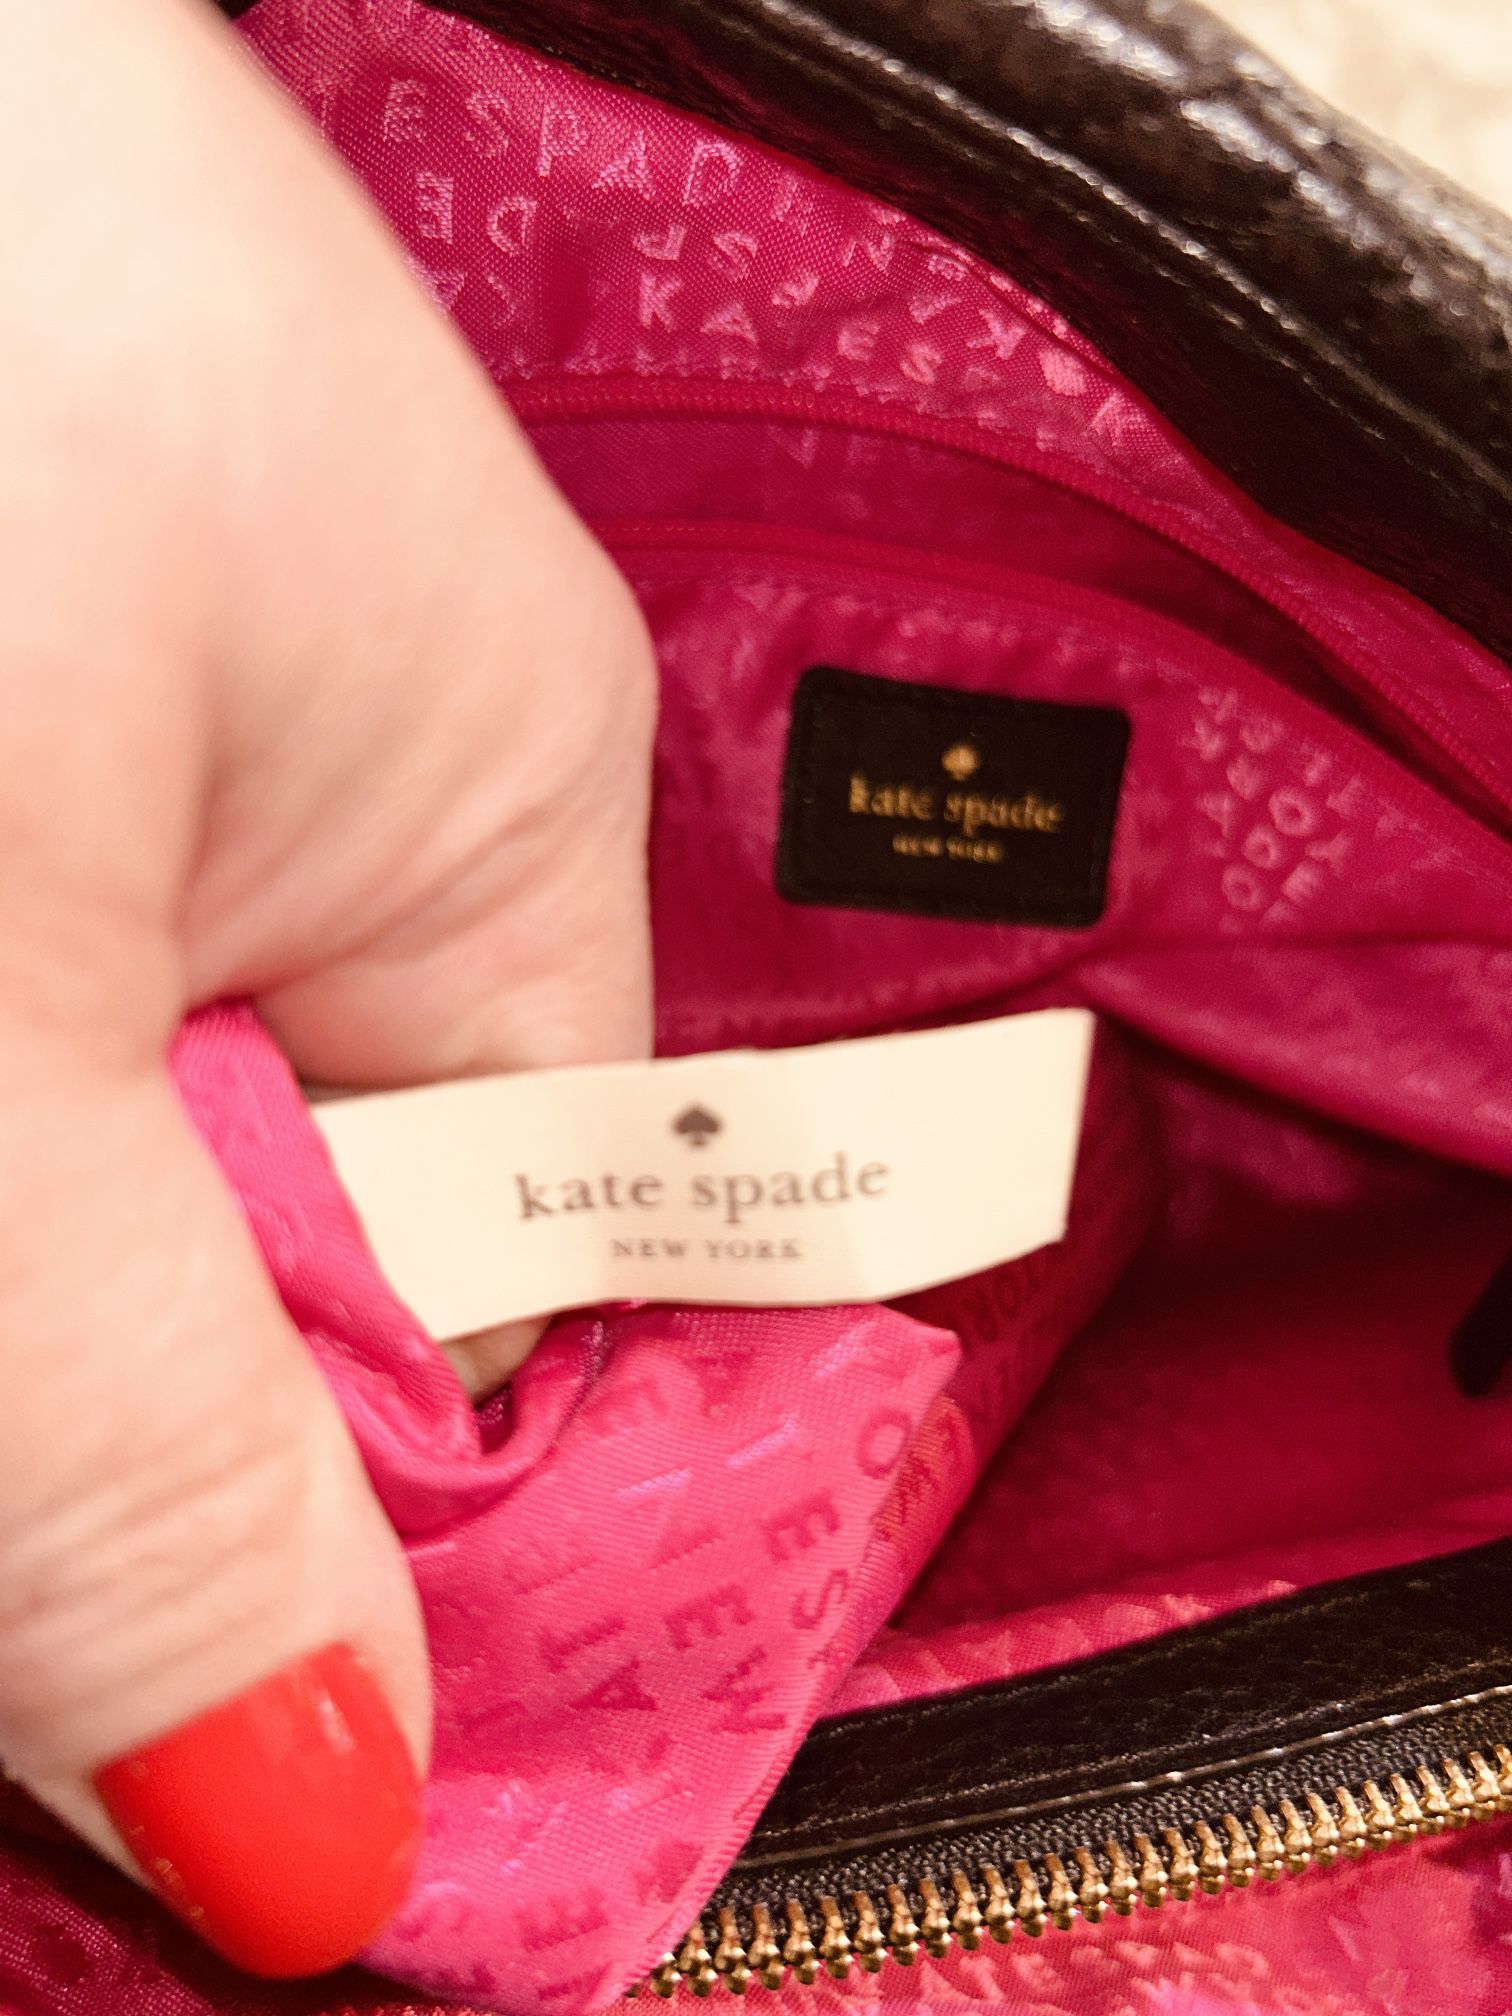 Kate Spade York quilted Handbag New Without Tags 